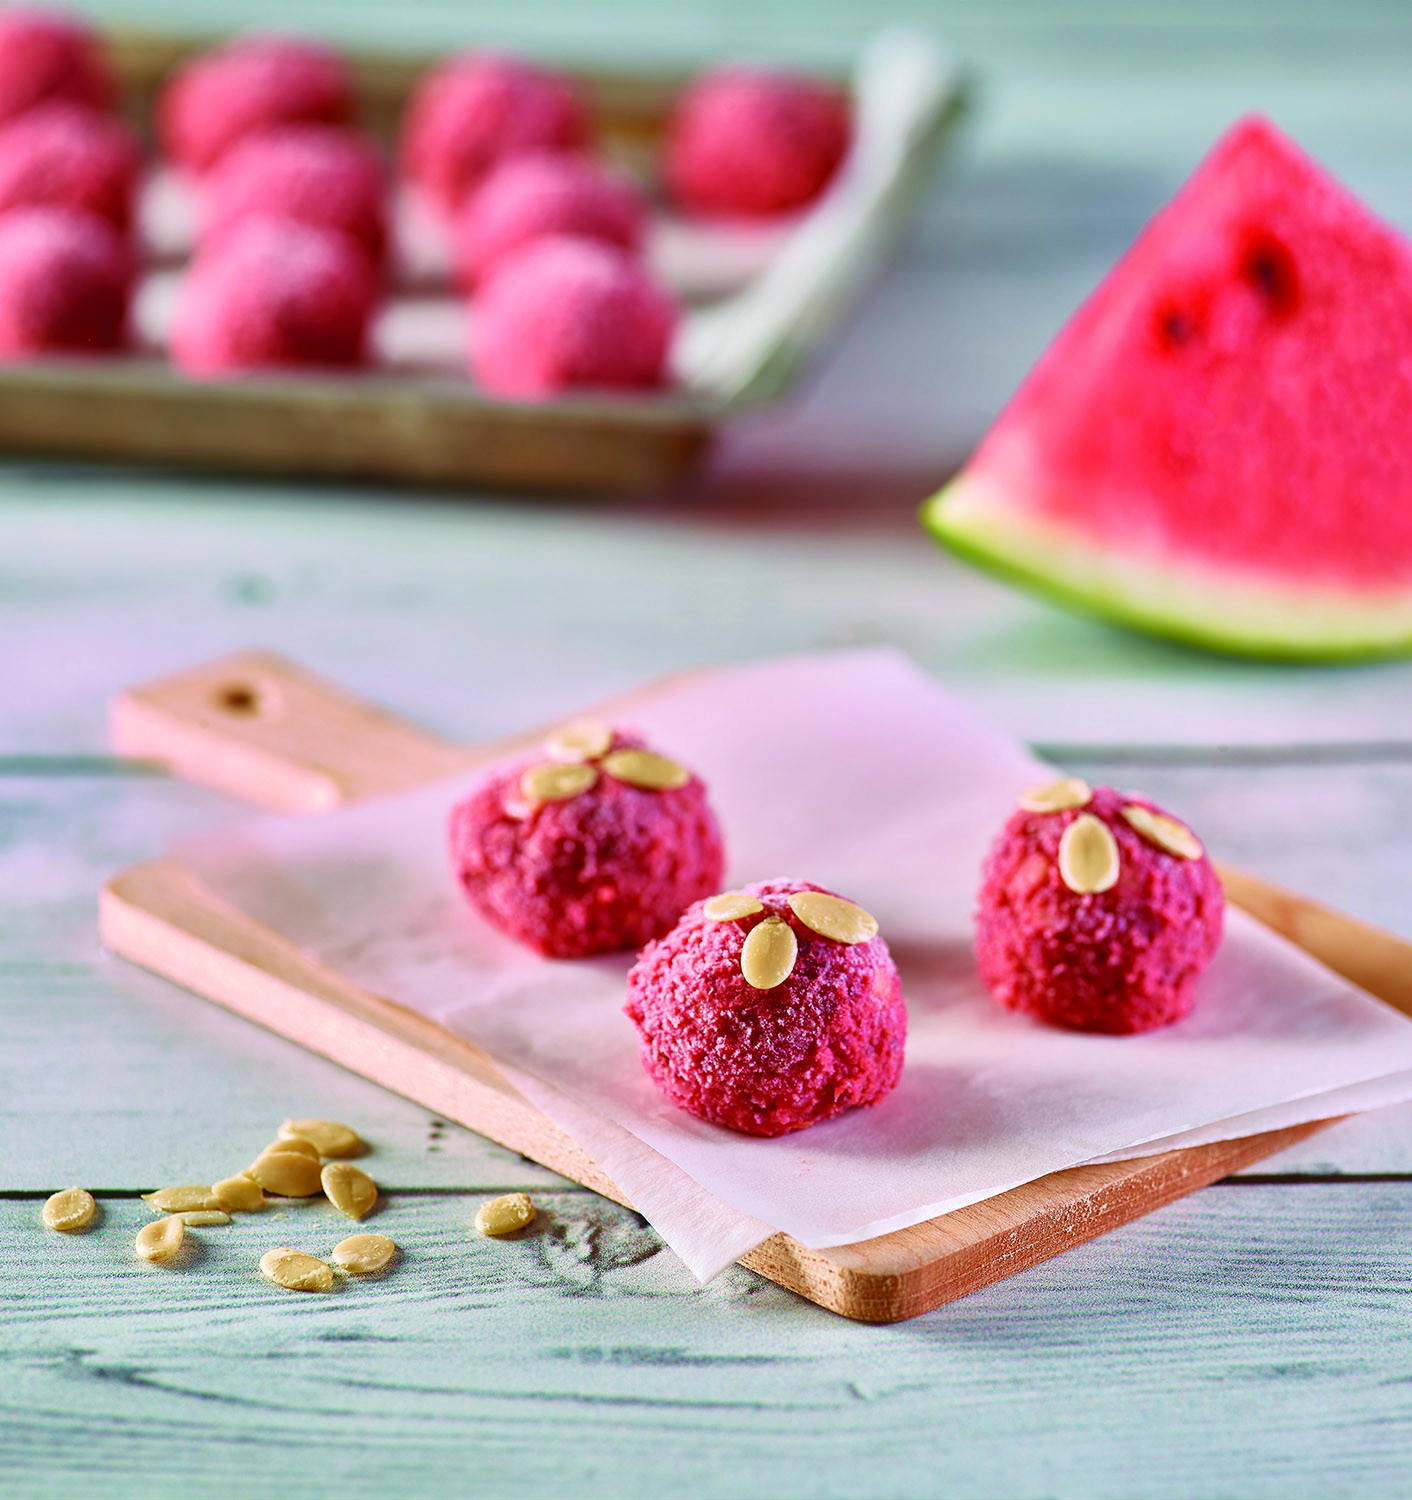 There’s no need to wait for summer to enjoy watermelon. This healthy, yummy bite is a delectable addition to your culinary repertoire.